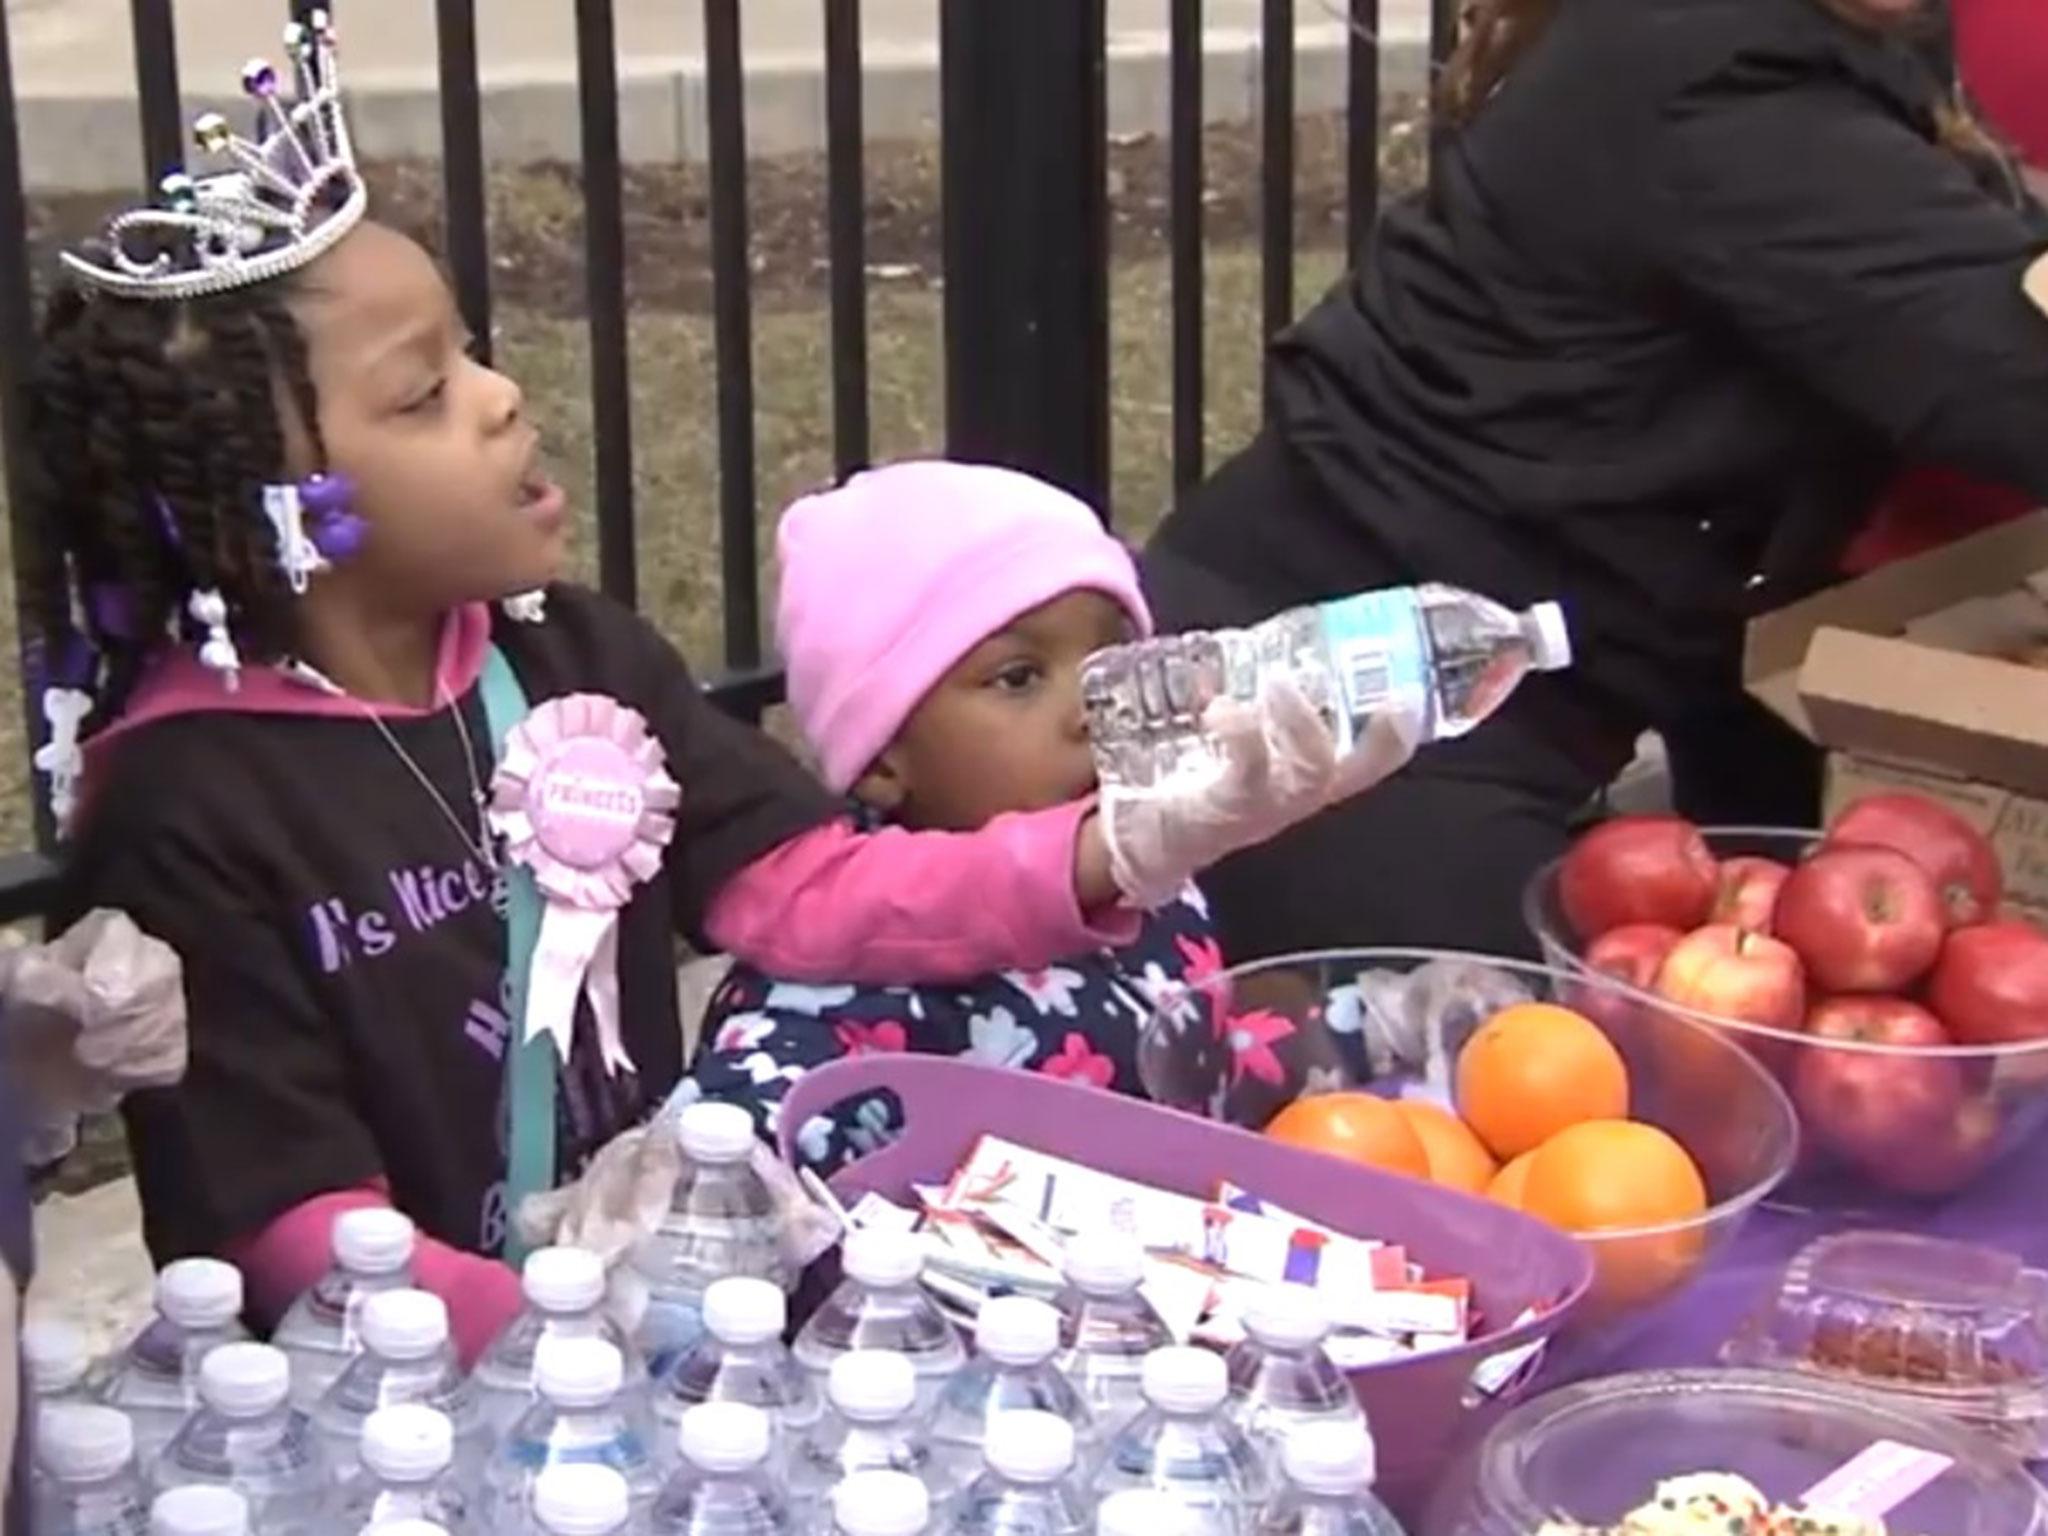 Armani Crews, pictured in the tiara, sacrificed a birthday present to instead feed the homeless